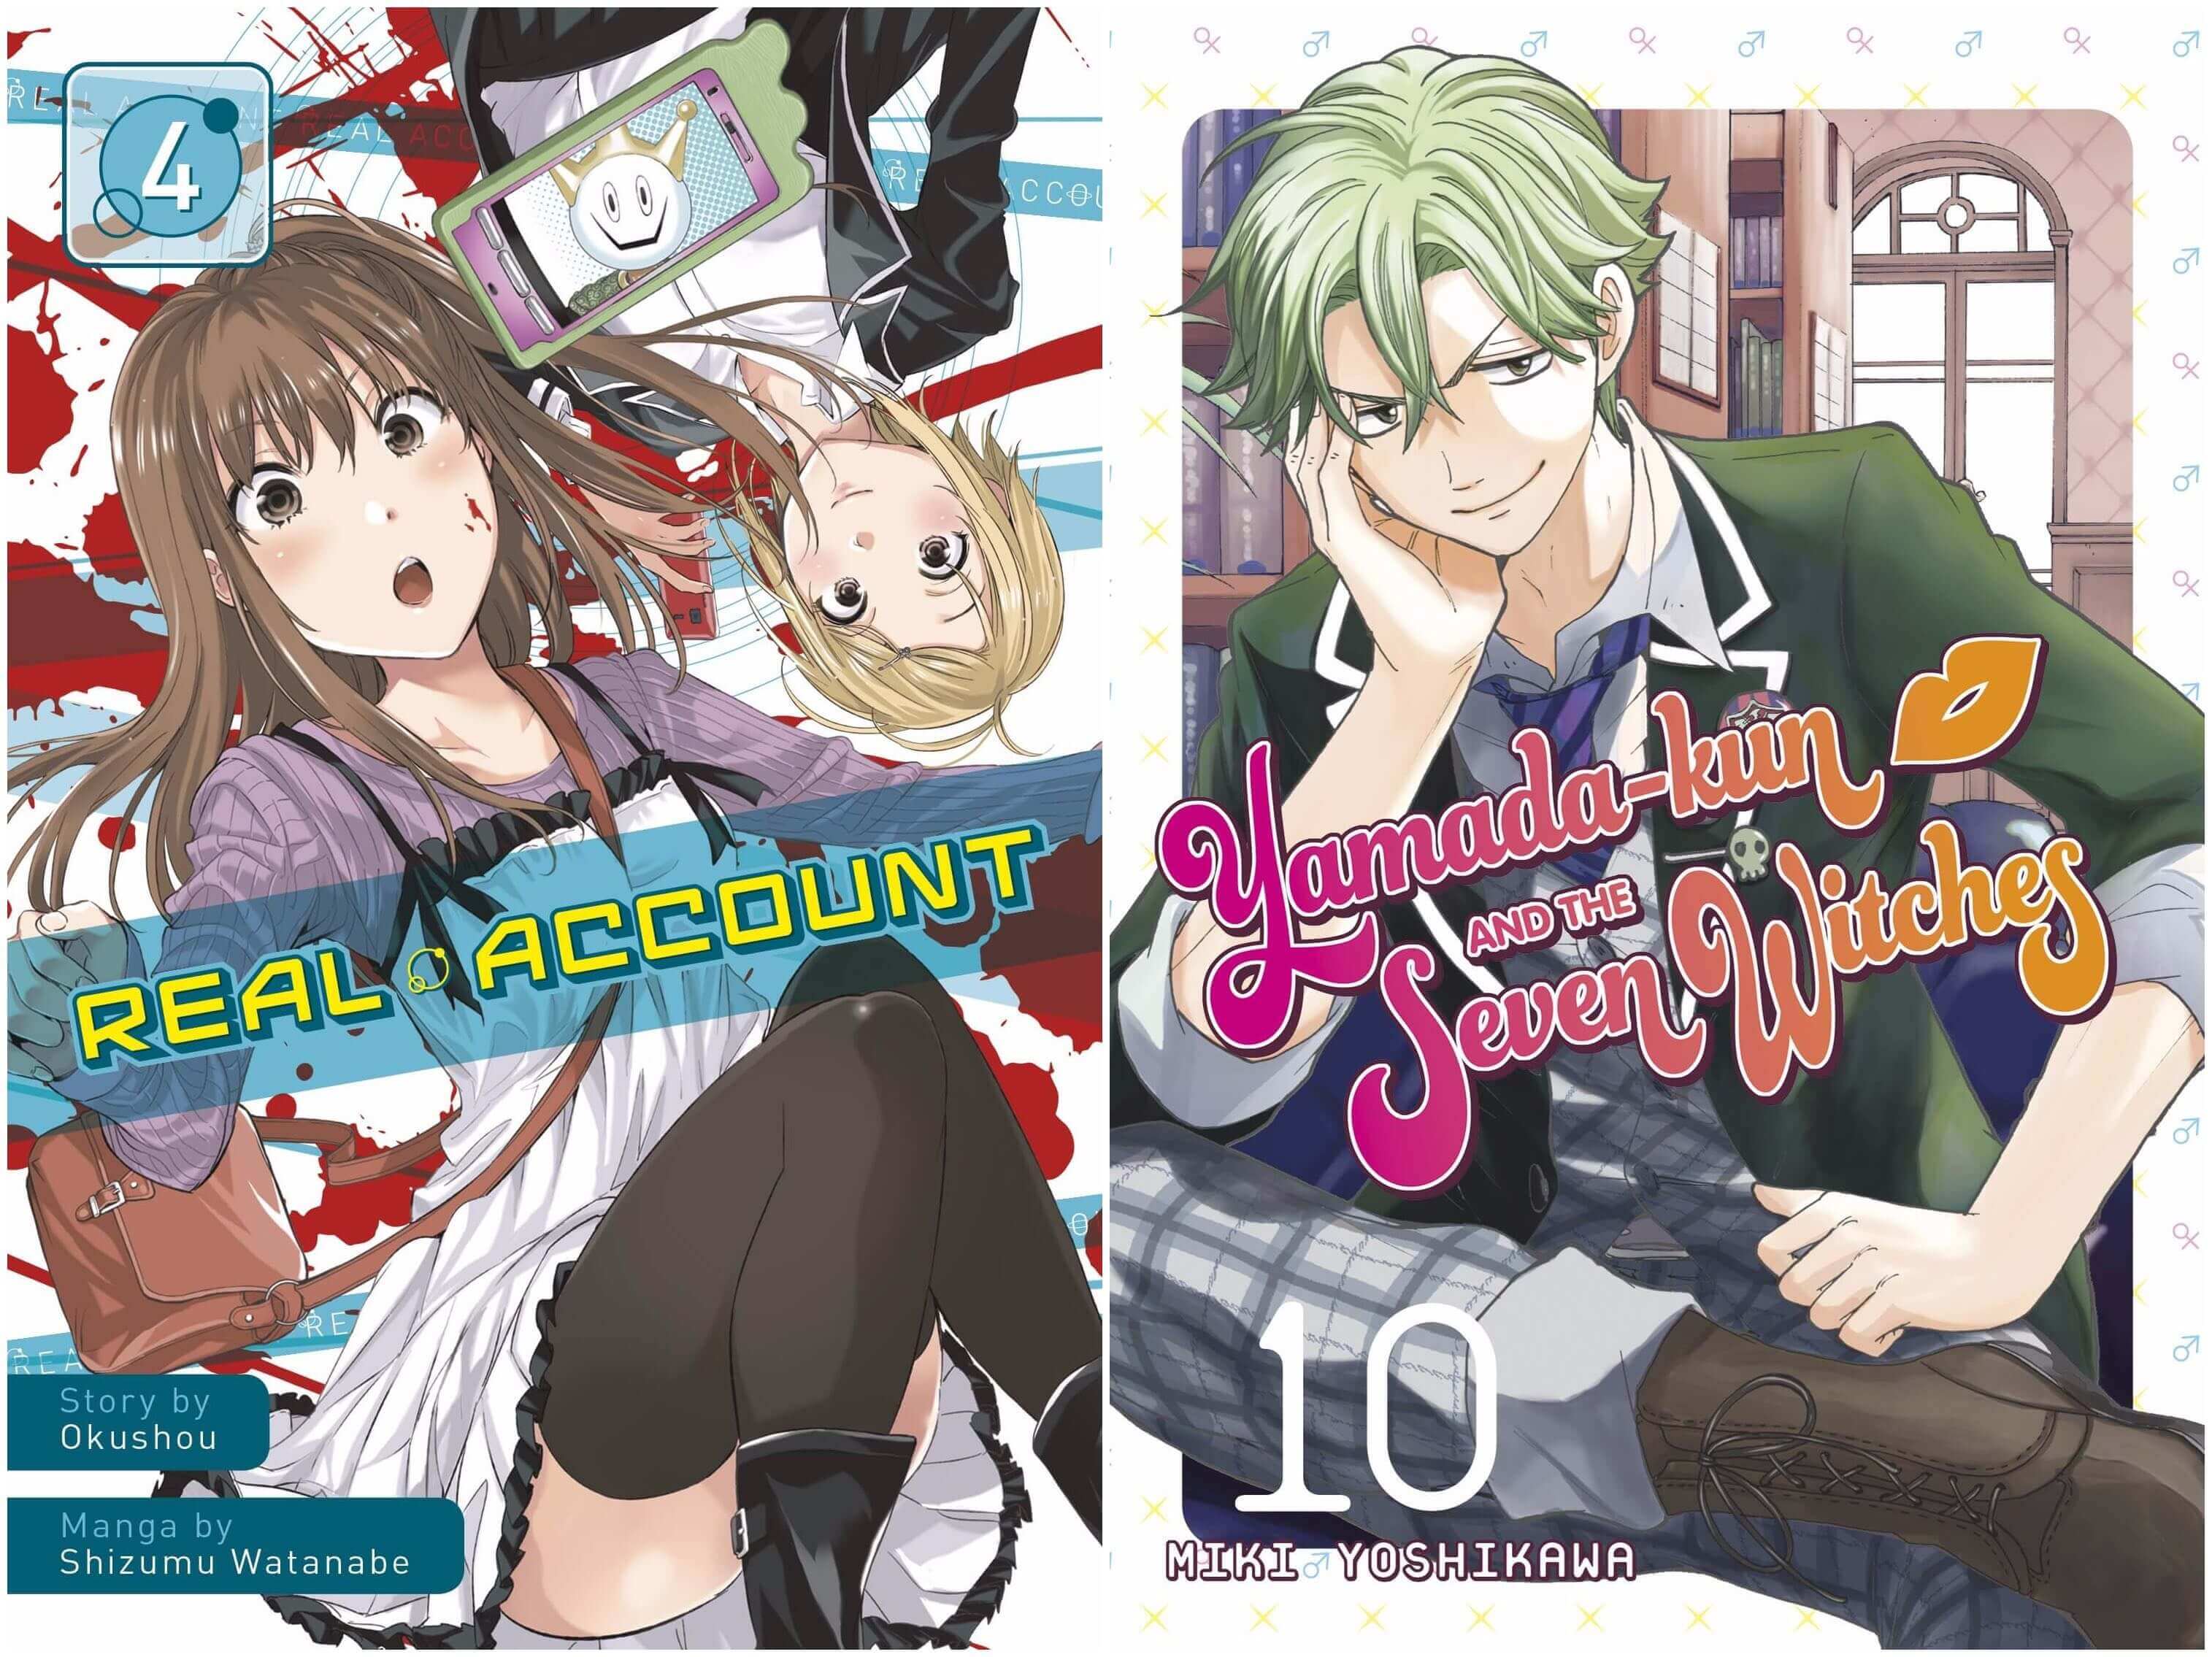 September 2016 Manga Releases Covers for Real Account and Yamada-kun and the Seven Witches